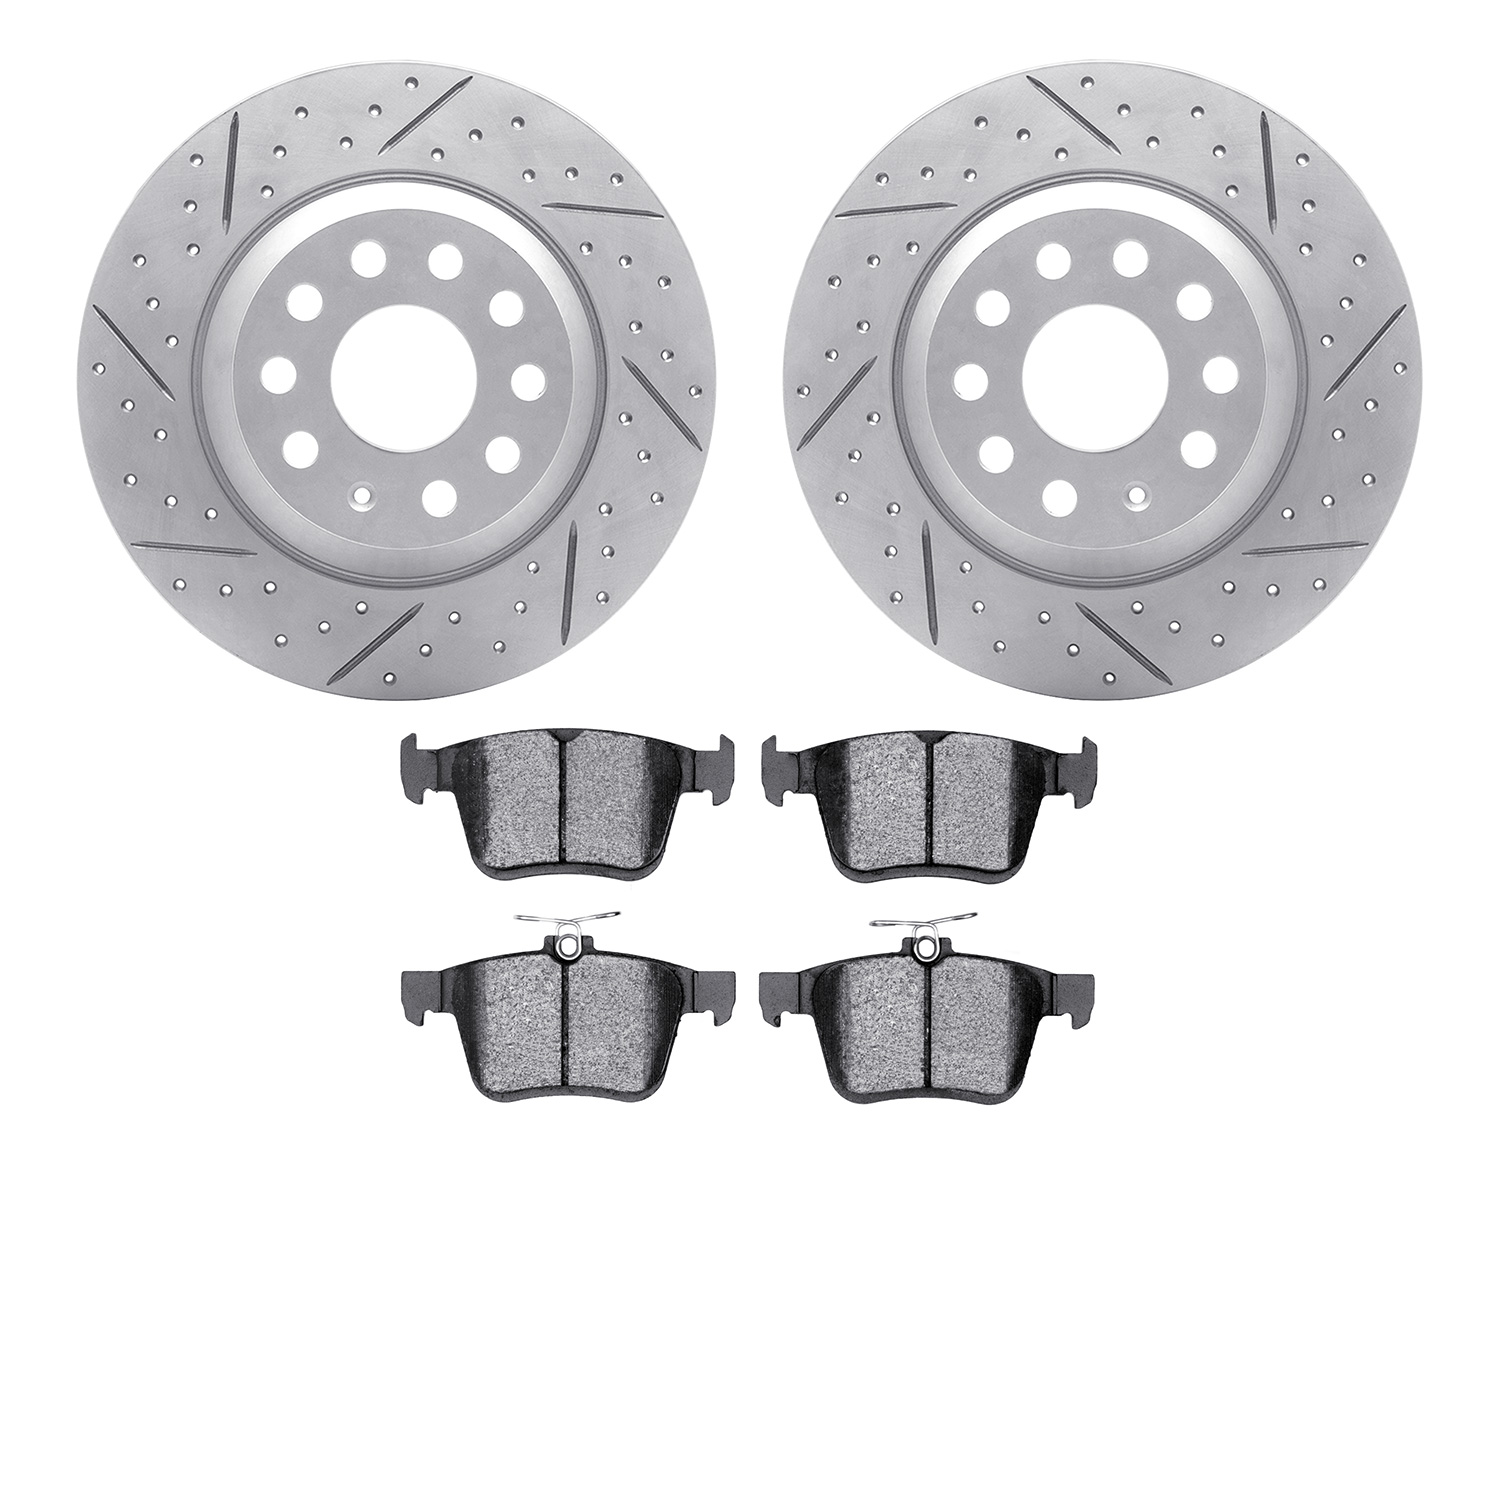 2502-73081 Geoperformance Drilled/Slotted Rotors w/5000 Advanced Brake Pads Kit, Fits Select Audi/Volkswagen, Position: Rear